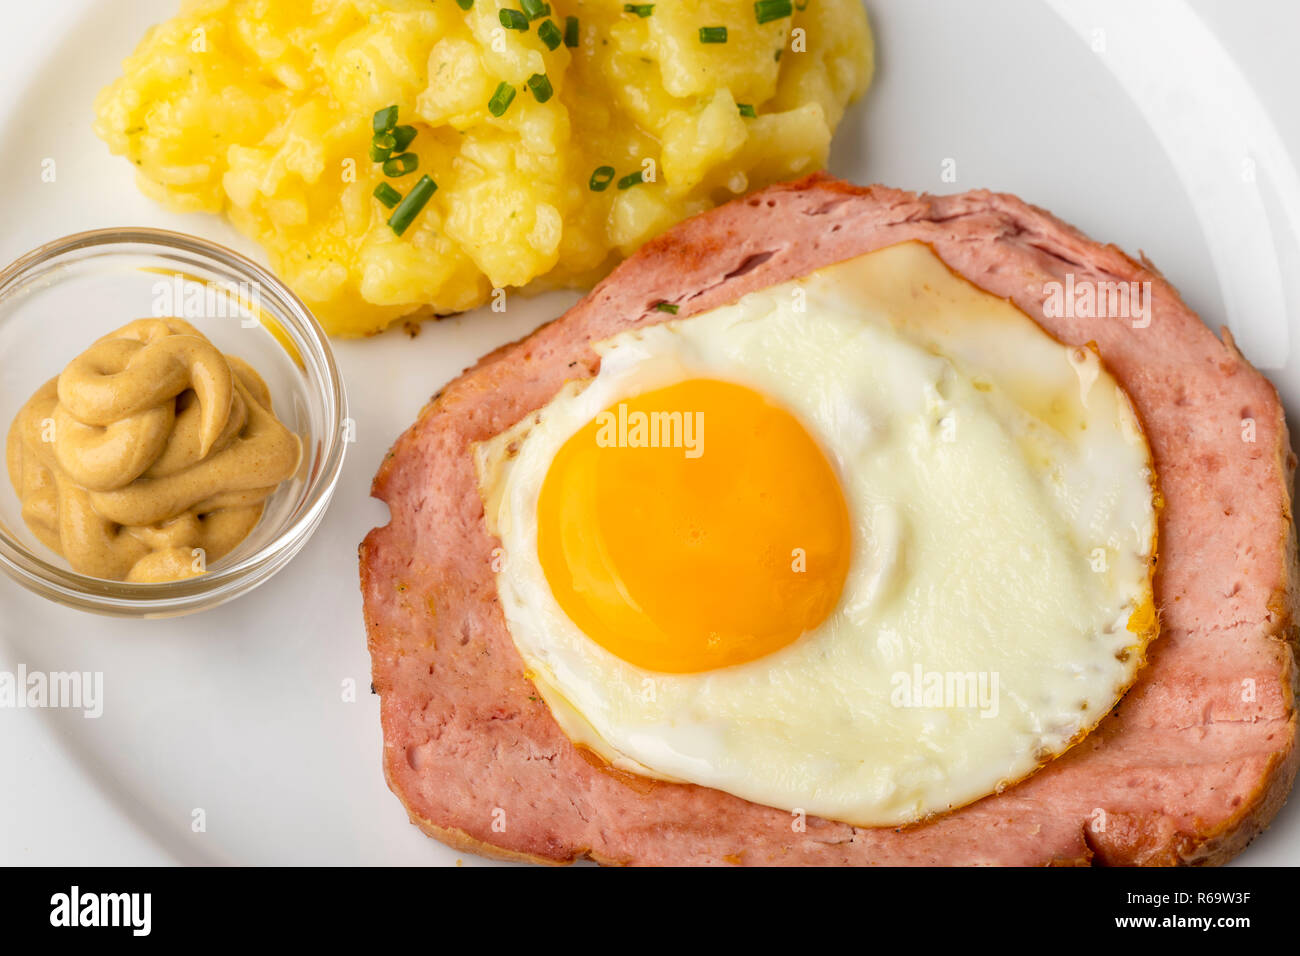 Meatloaf And Egg Stock Photo